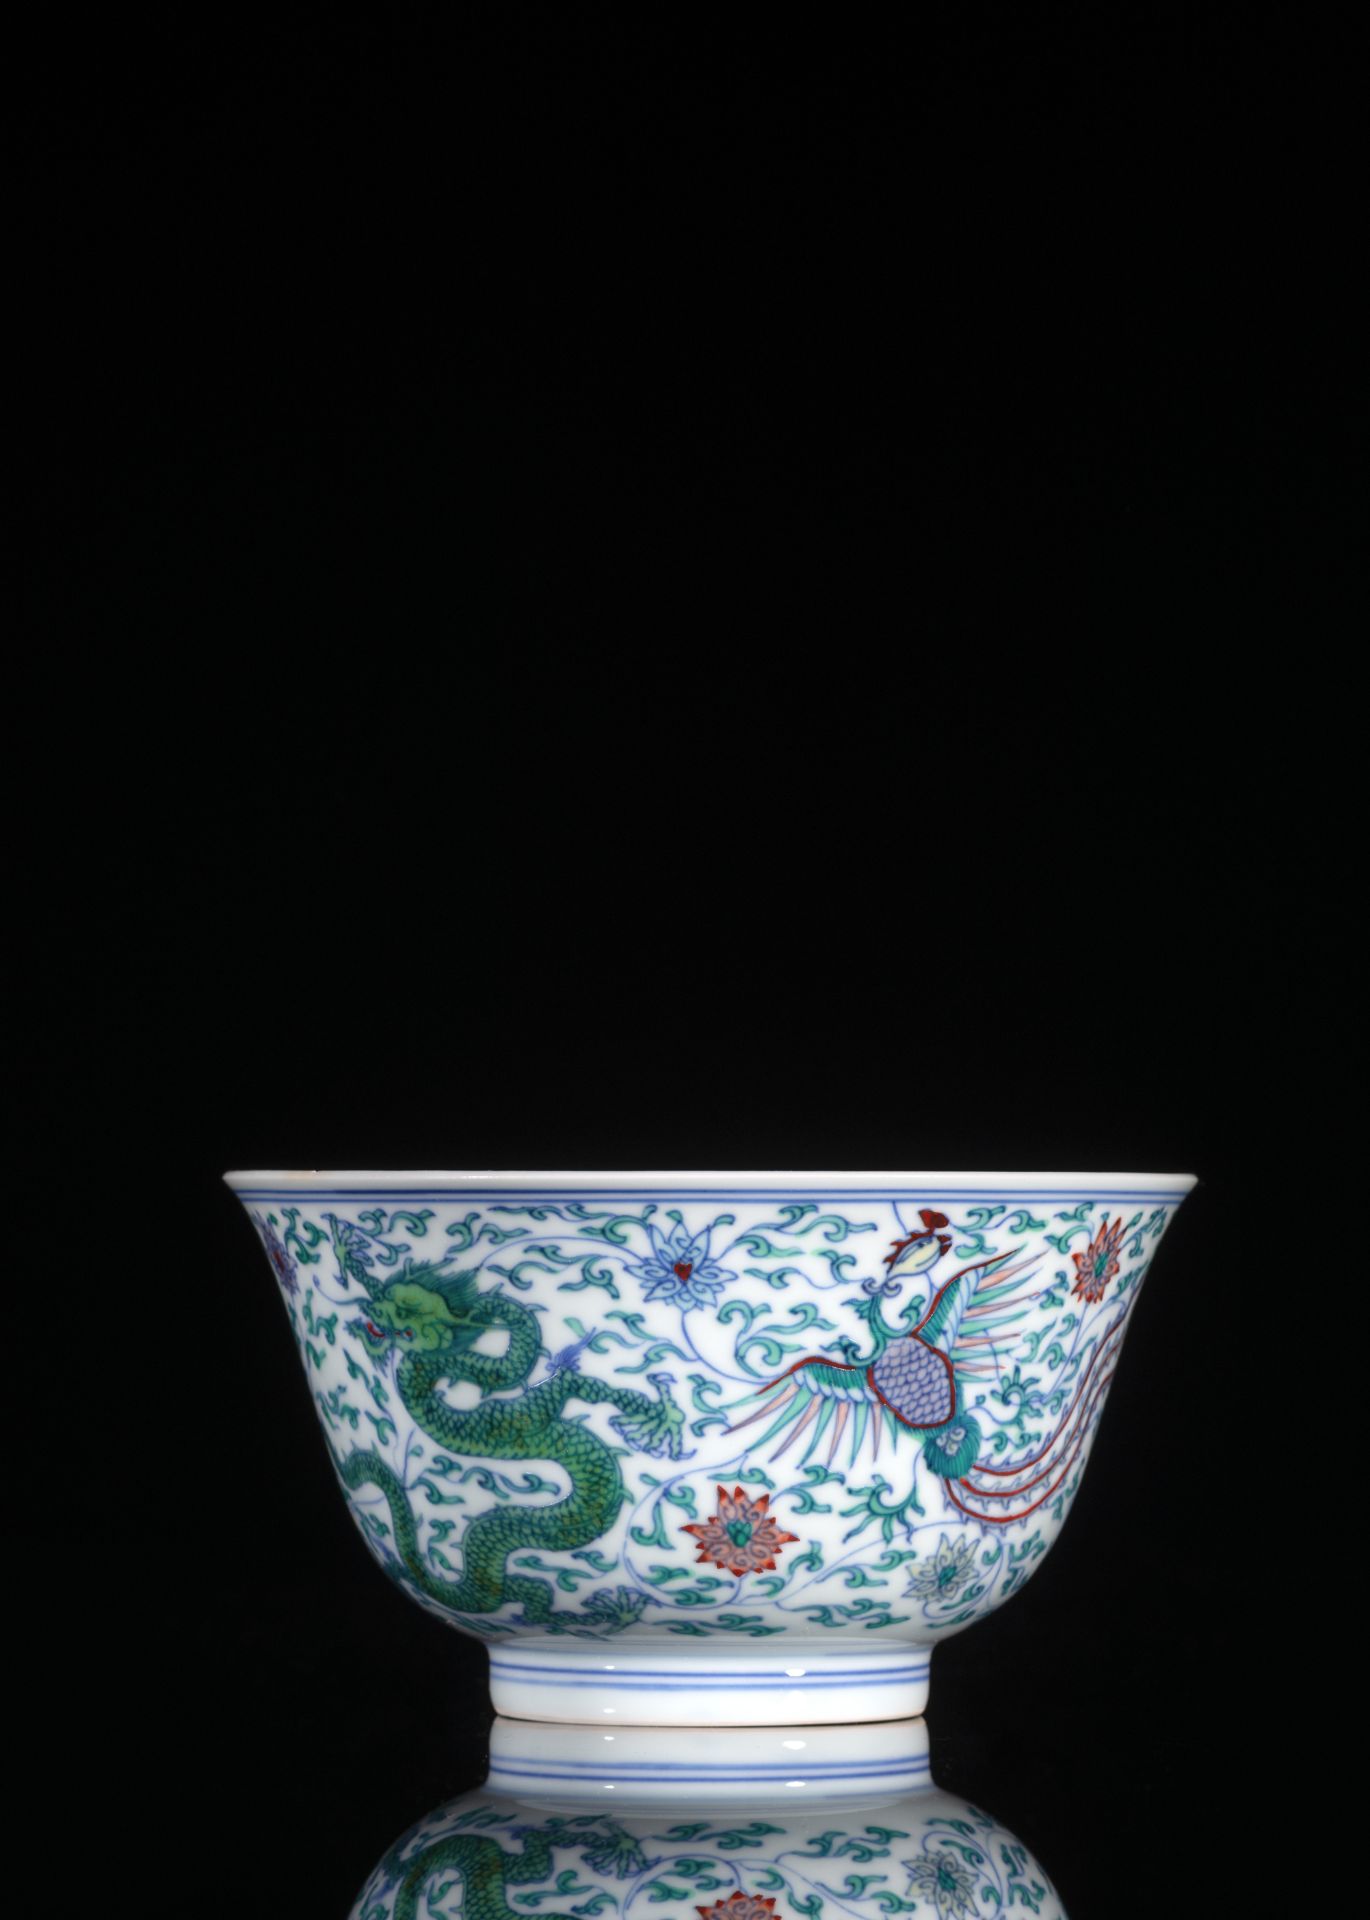 A FINE AND VERY RARE IMPERIAL DOUCAI DRAGON AND PHOENIX BOWL